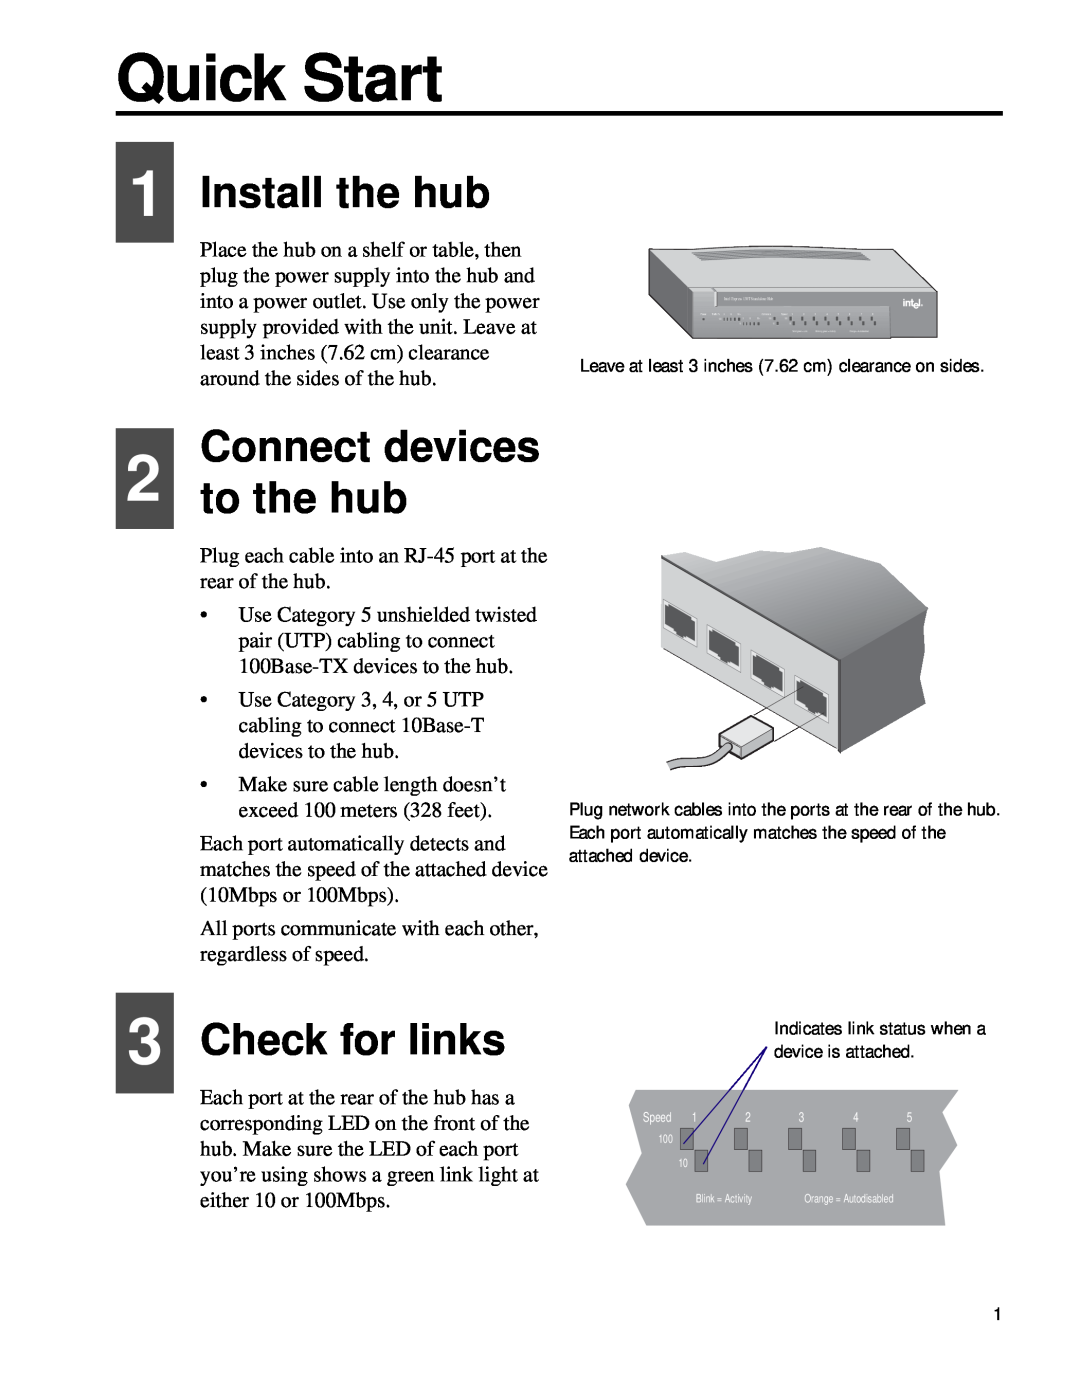 Intel 130T manual Install the hub, Connect devices 2 to the hub, Check for links, Quick Start 